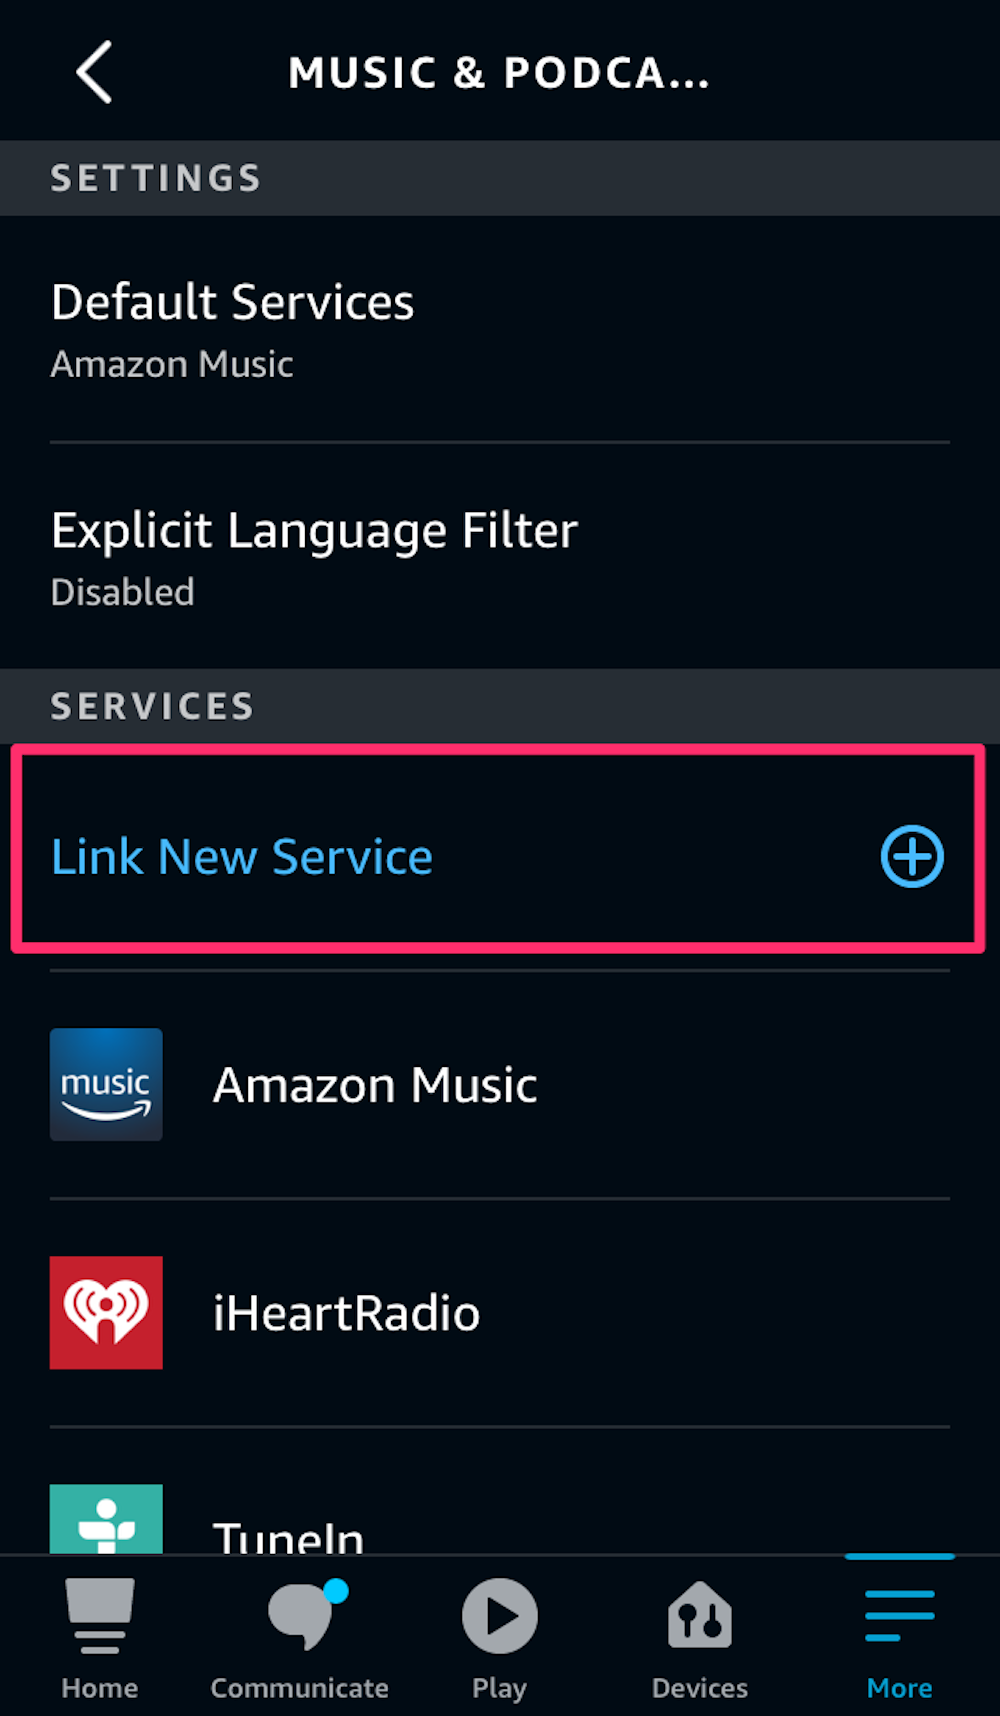 Screenshot of the Music & Podcasts section of Alexa's app settings